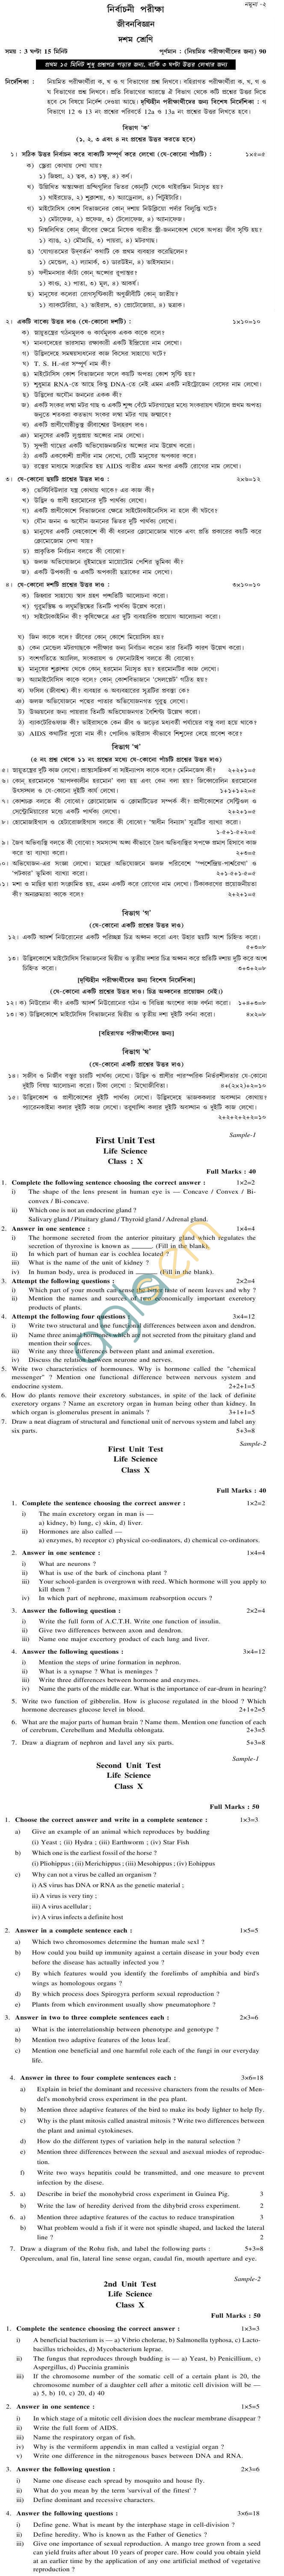 WB Board Sample Question Papers for Madhyamik Pariksha (Class 10) - Life Science